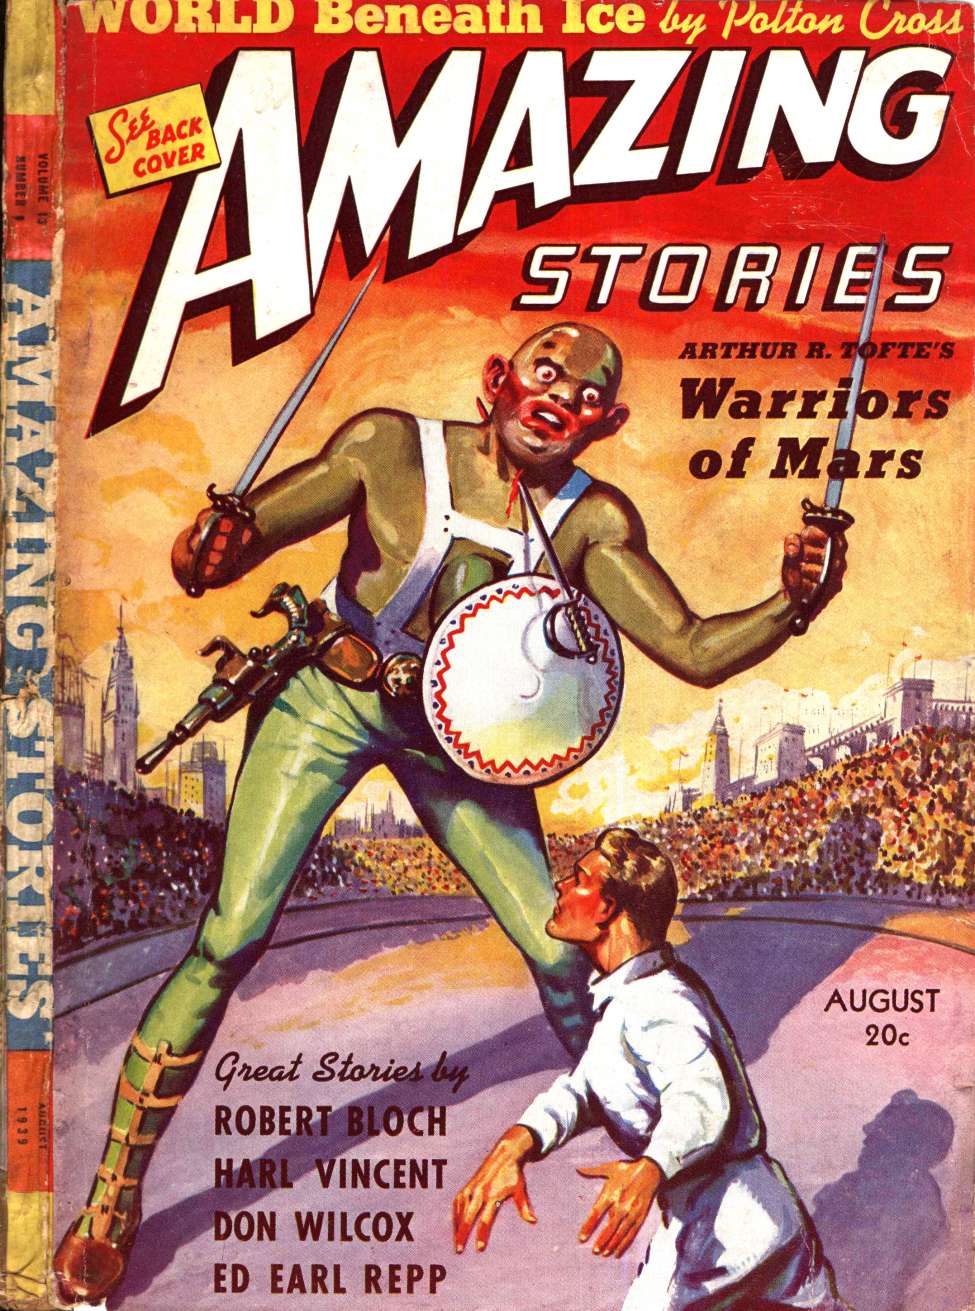 Comic Book Cover For Amazing Stories v13 8 - Warriors of Mars - Arthur Tofte